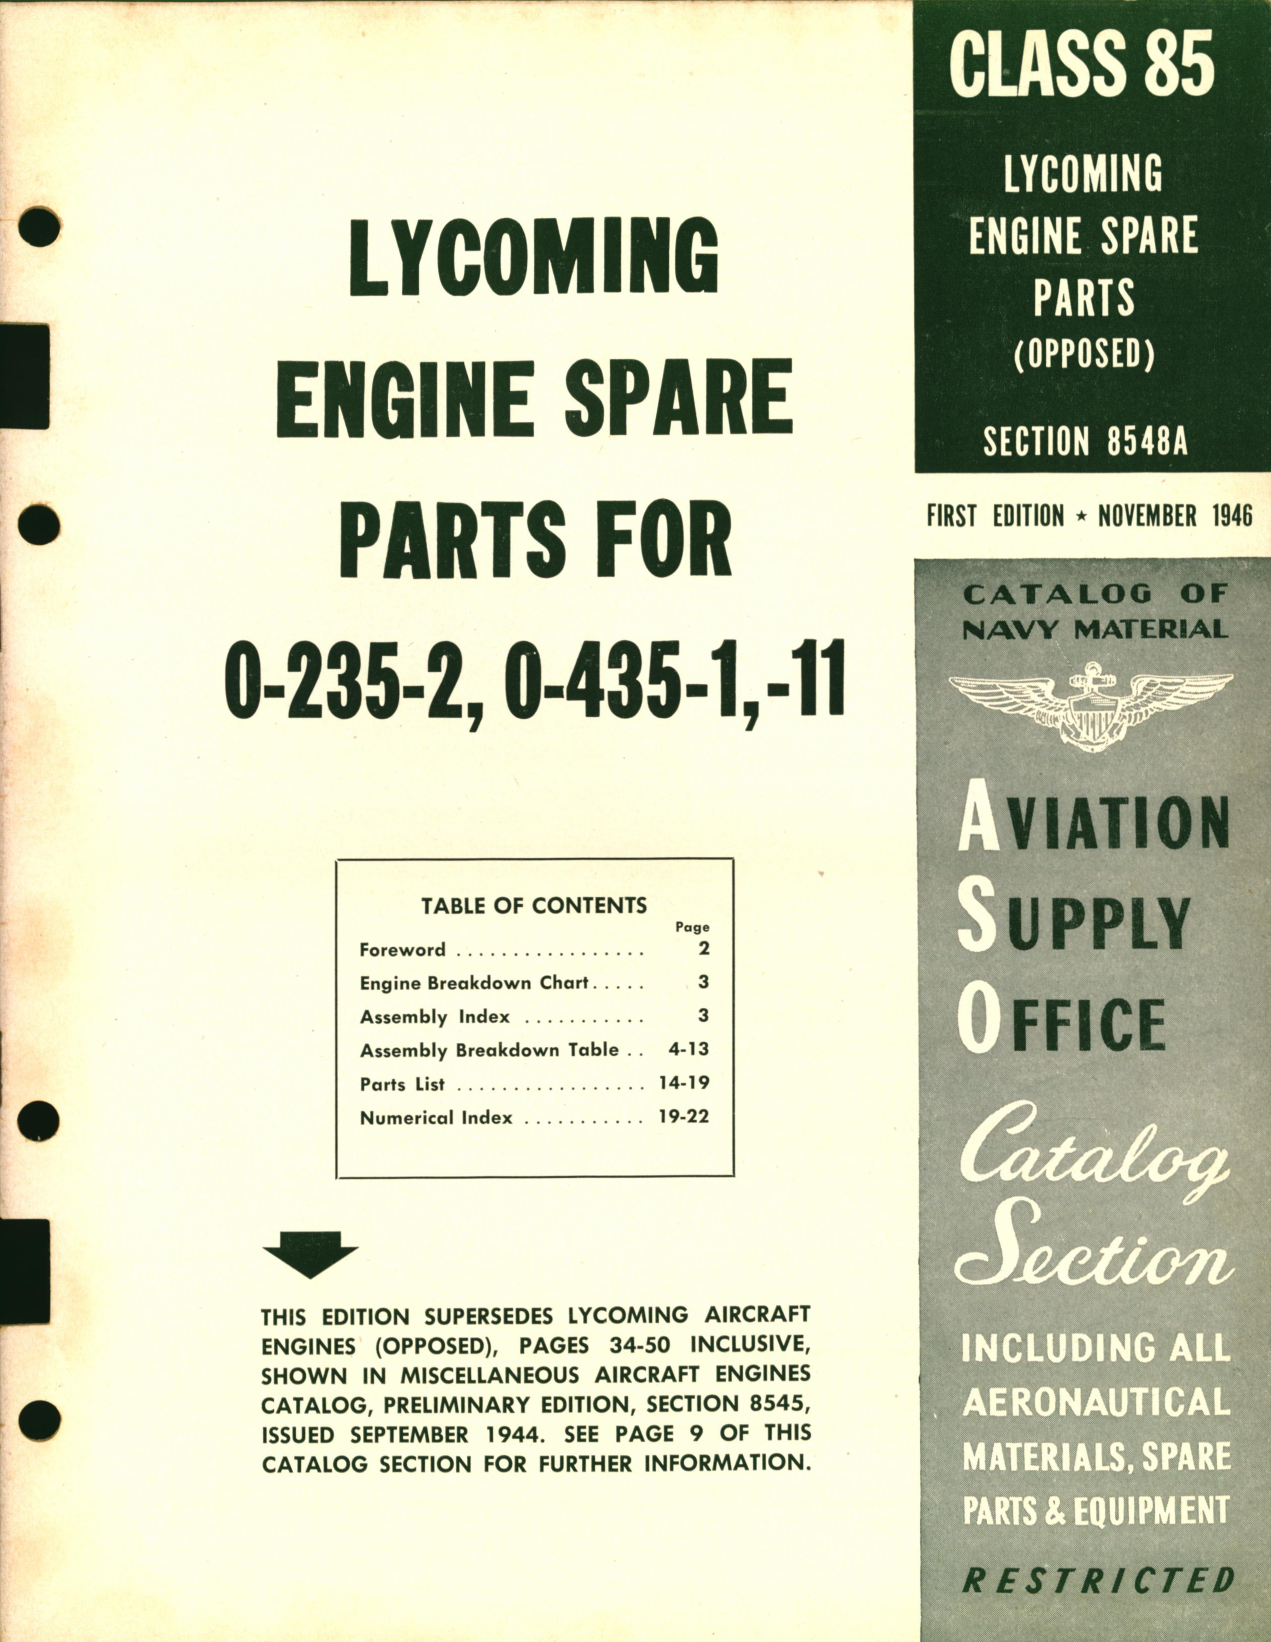 Sample page 1 from AirCorps Library document: Lycoming Engine Spare Parts (Opposed) for 0-235-2, 0-435-1, -11